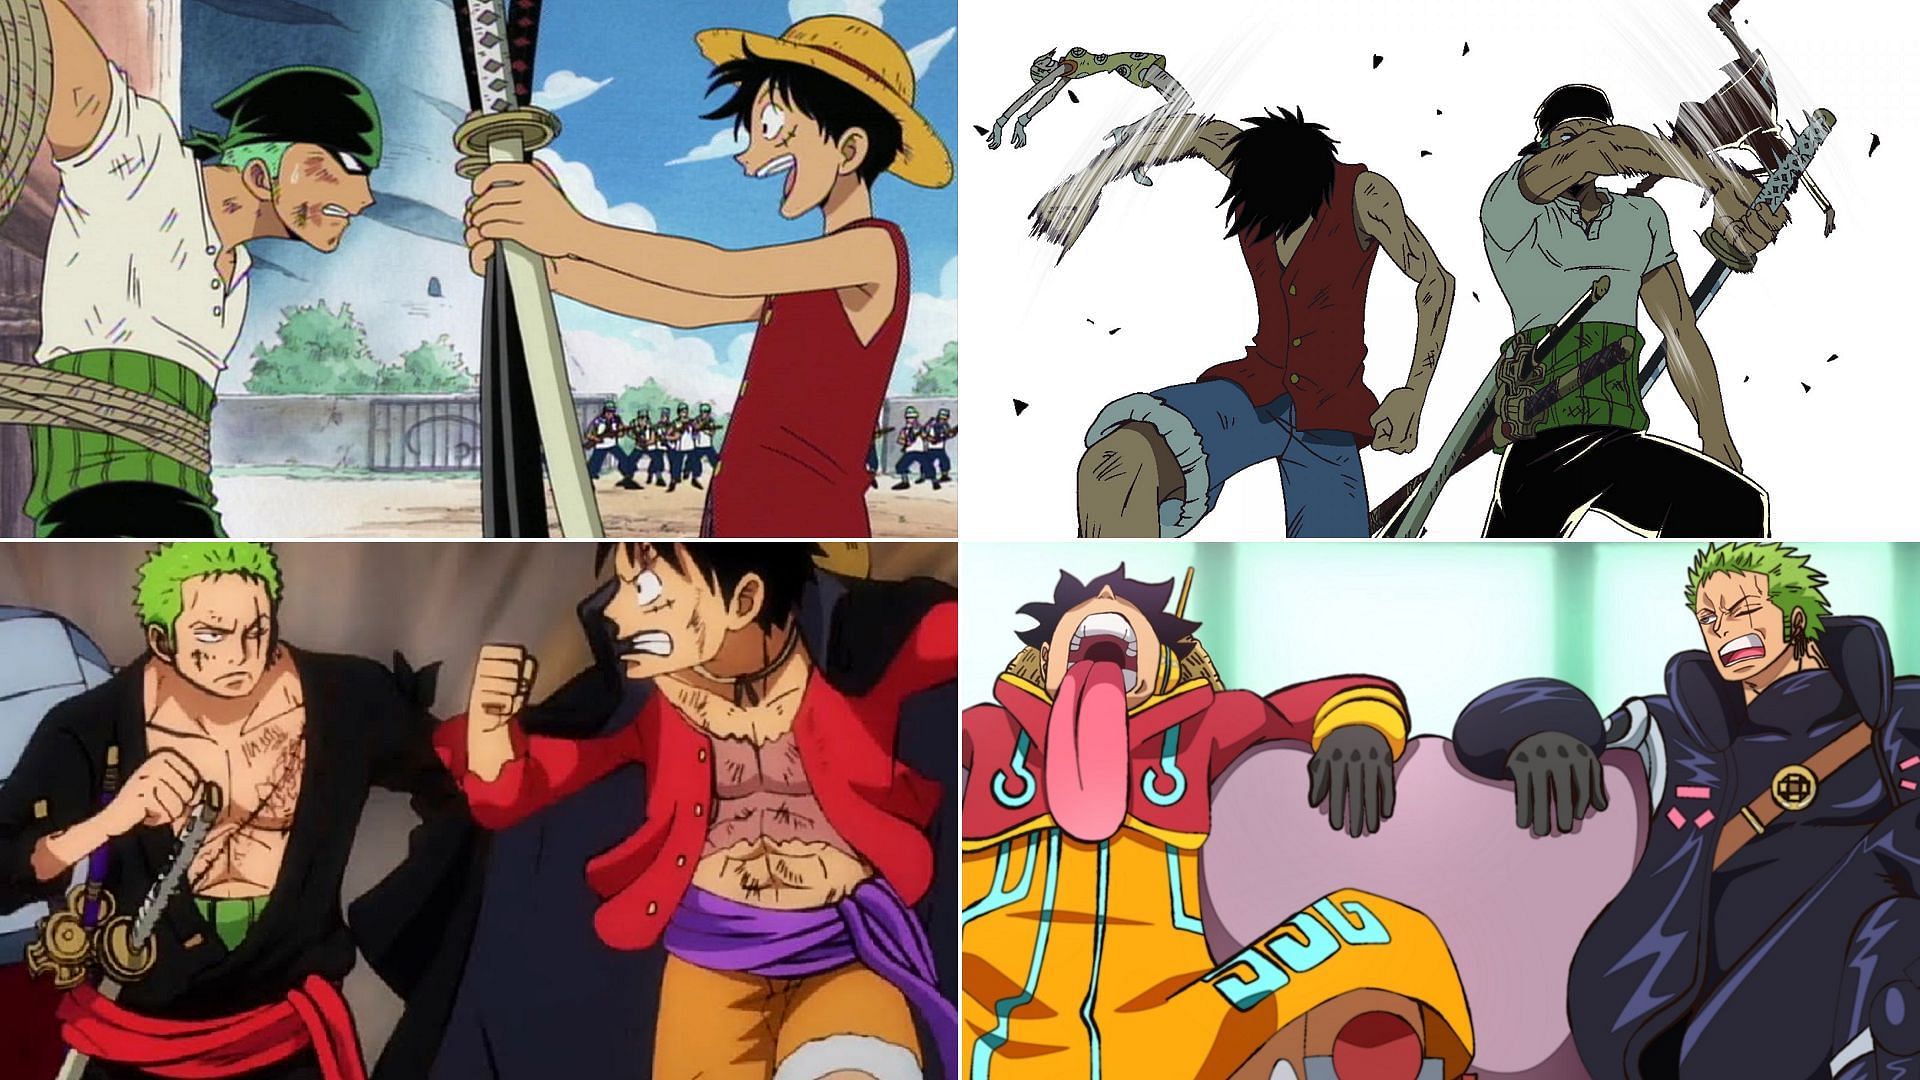 Luffy and Zoro forms the best duo in One Piece